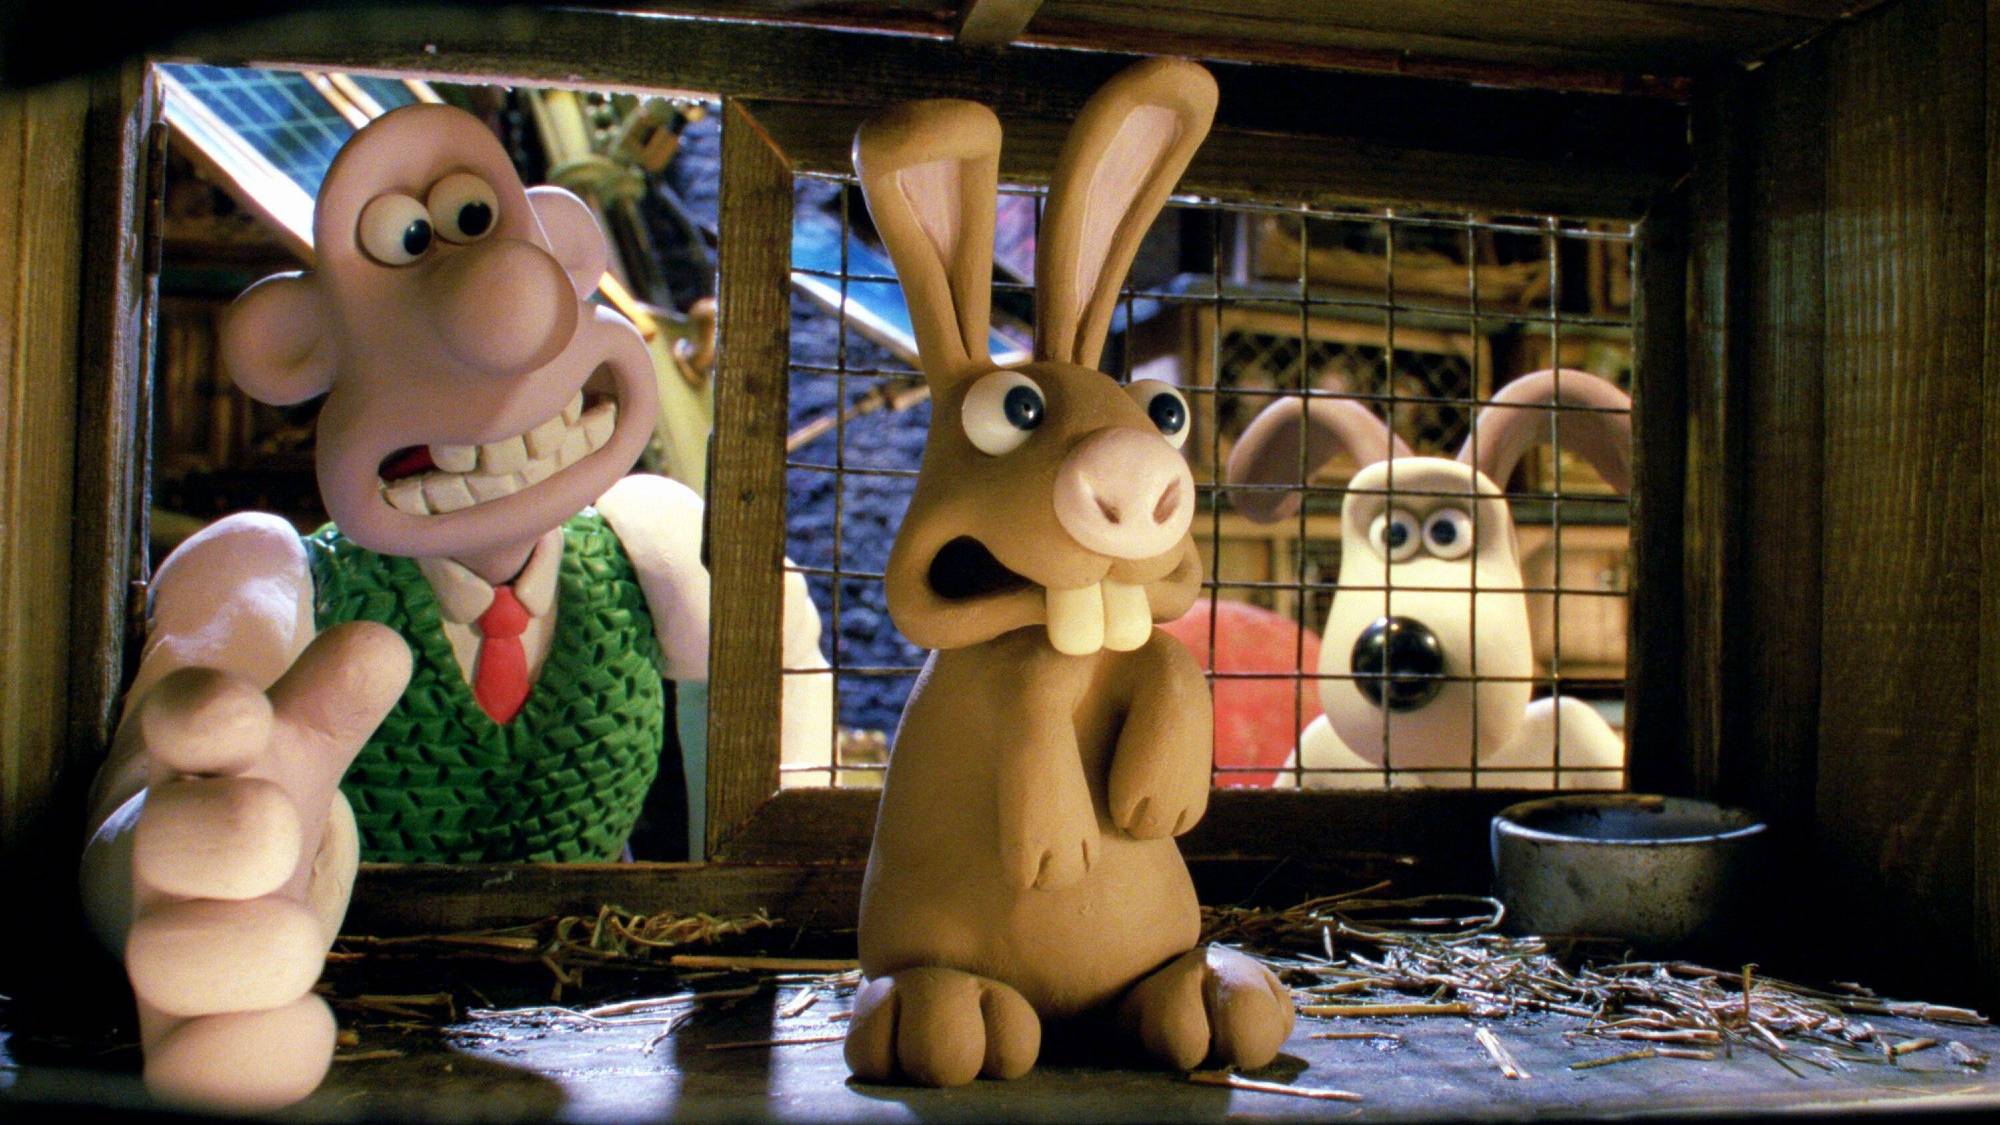 A scene from Wallace & Gromit: The Curse of the Were-Rabbit